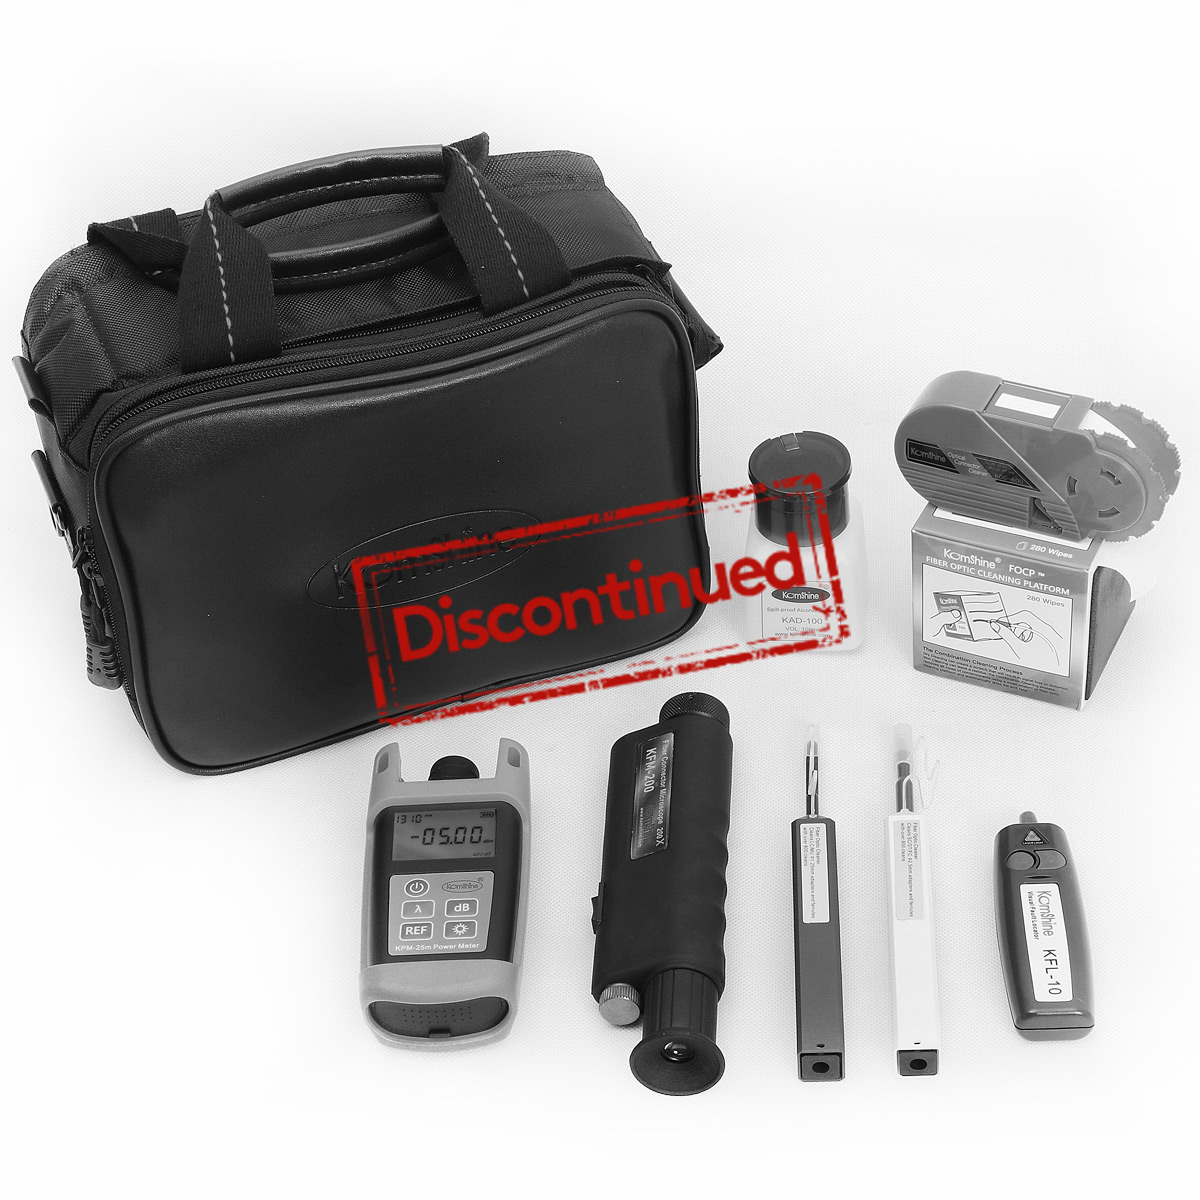 KCI-8E series Cleaning & Inspection Kits